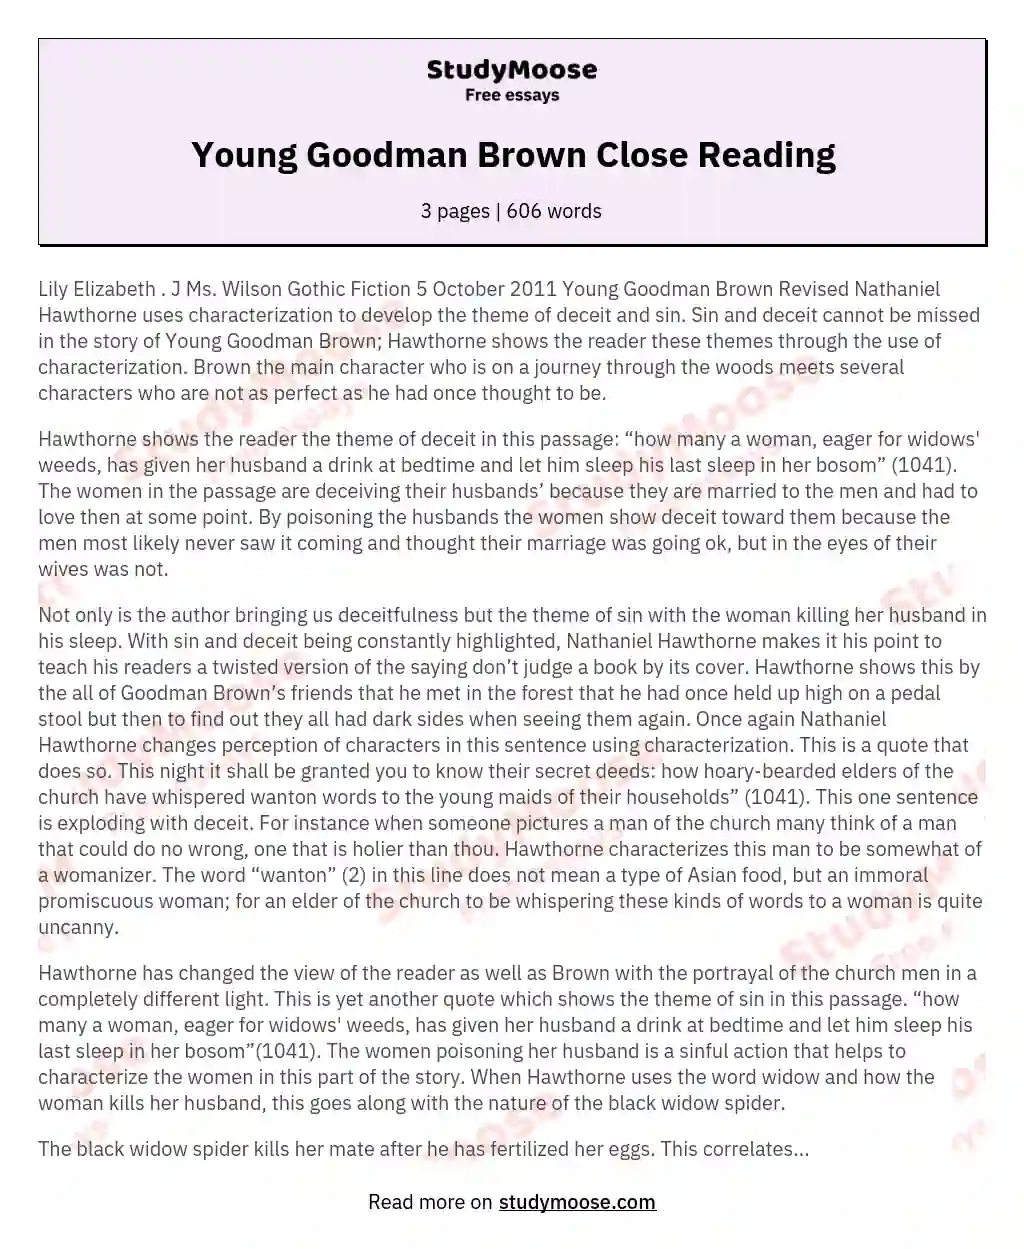 Young Goodman Brown Close Reading essay